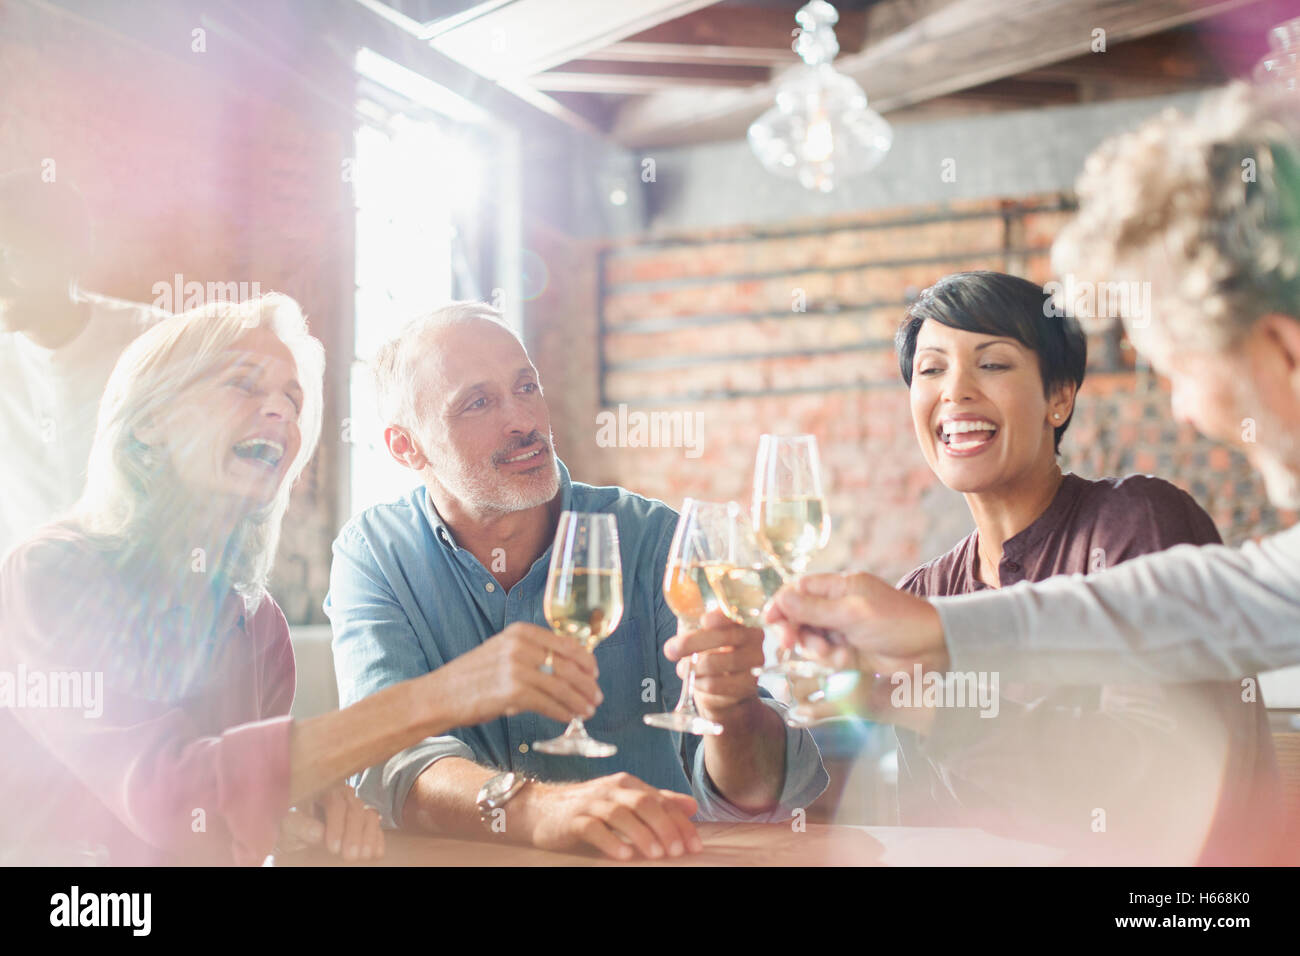 Friends toasting white wine glasses at restaurant table Stock Photo